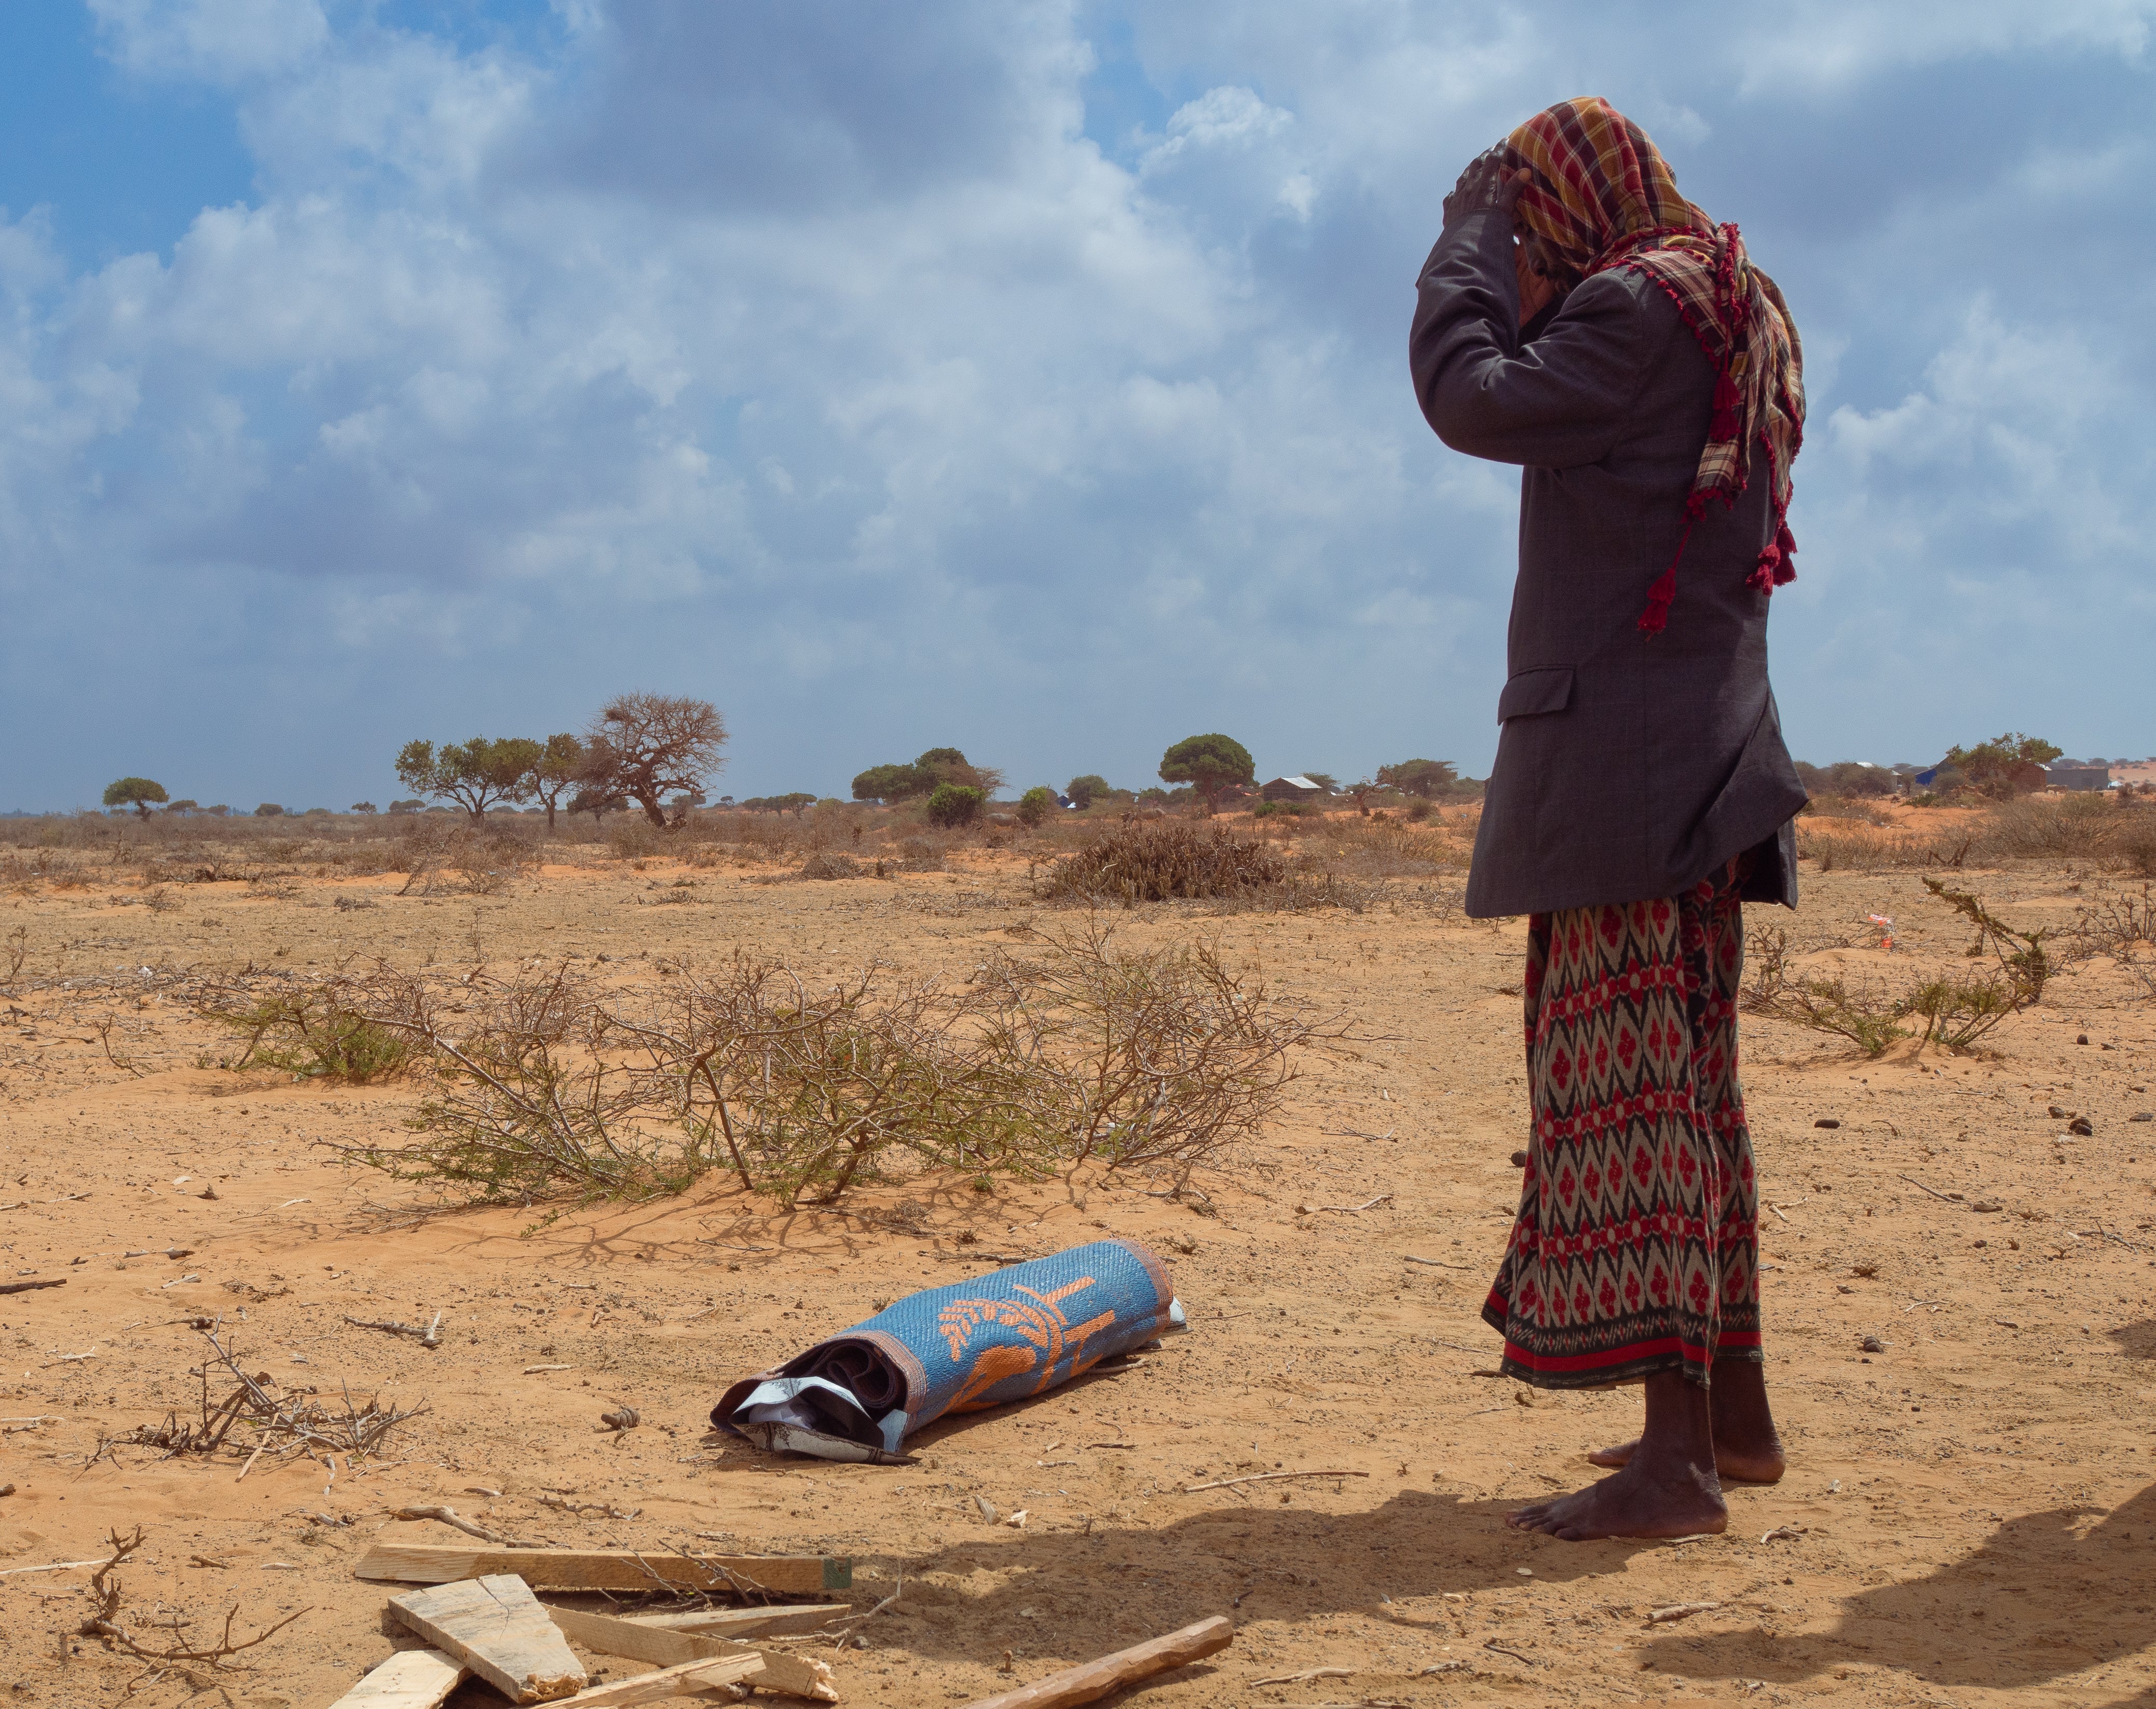 A mourner prepares for the burial of 4-year-old Ubah, whose body was wrapped in a blue and orange sleeping mat, in Jubaland, Somalia